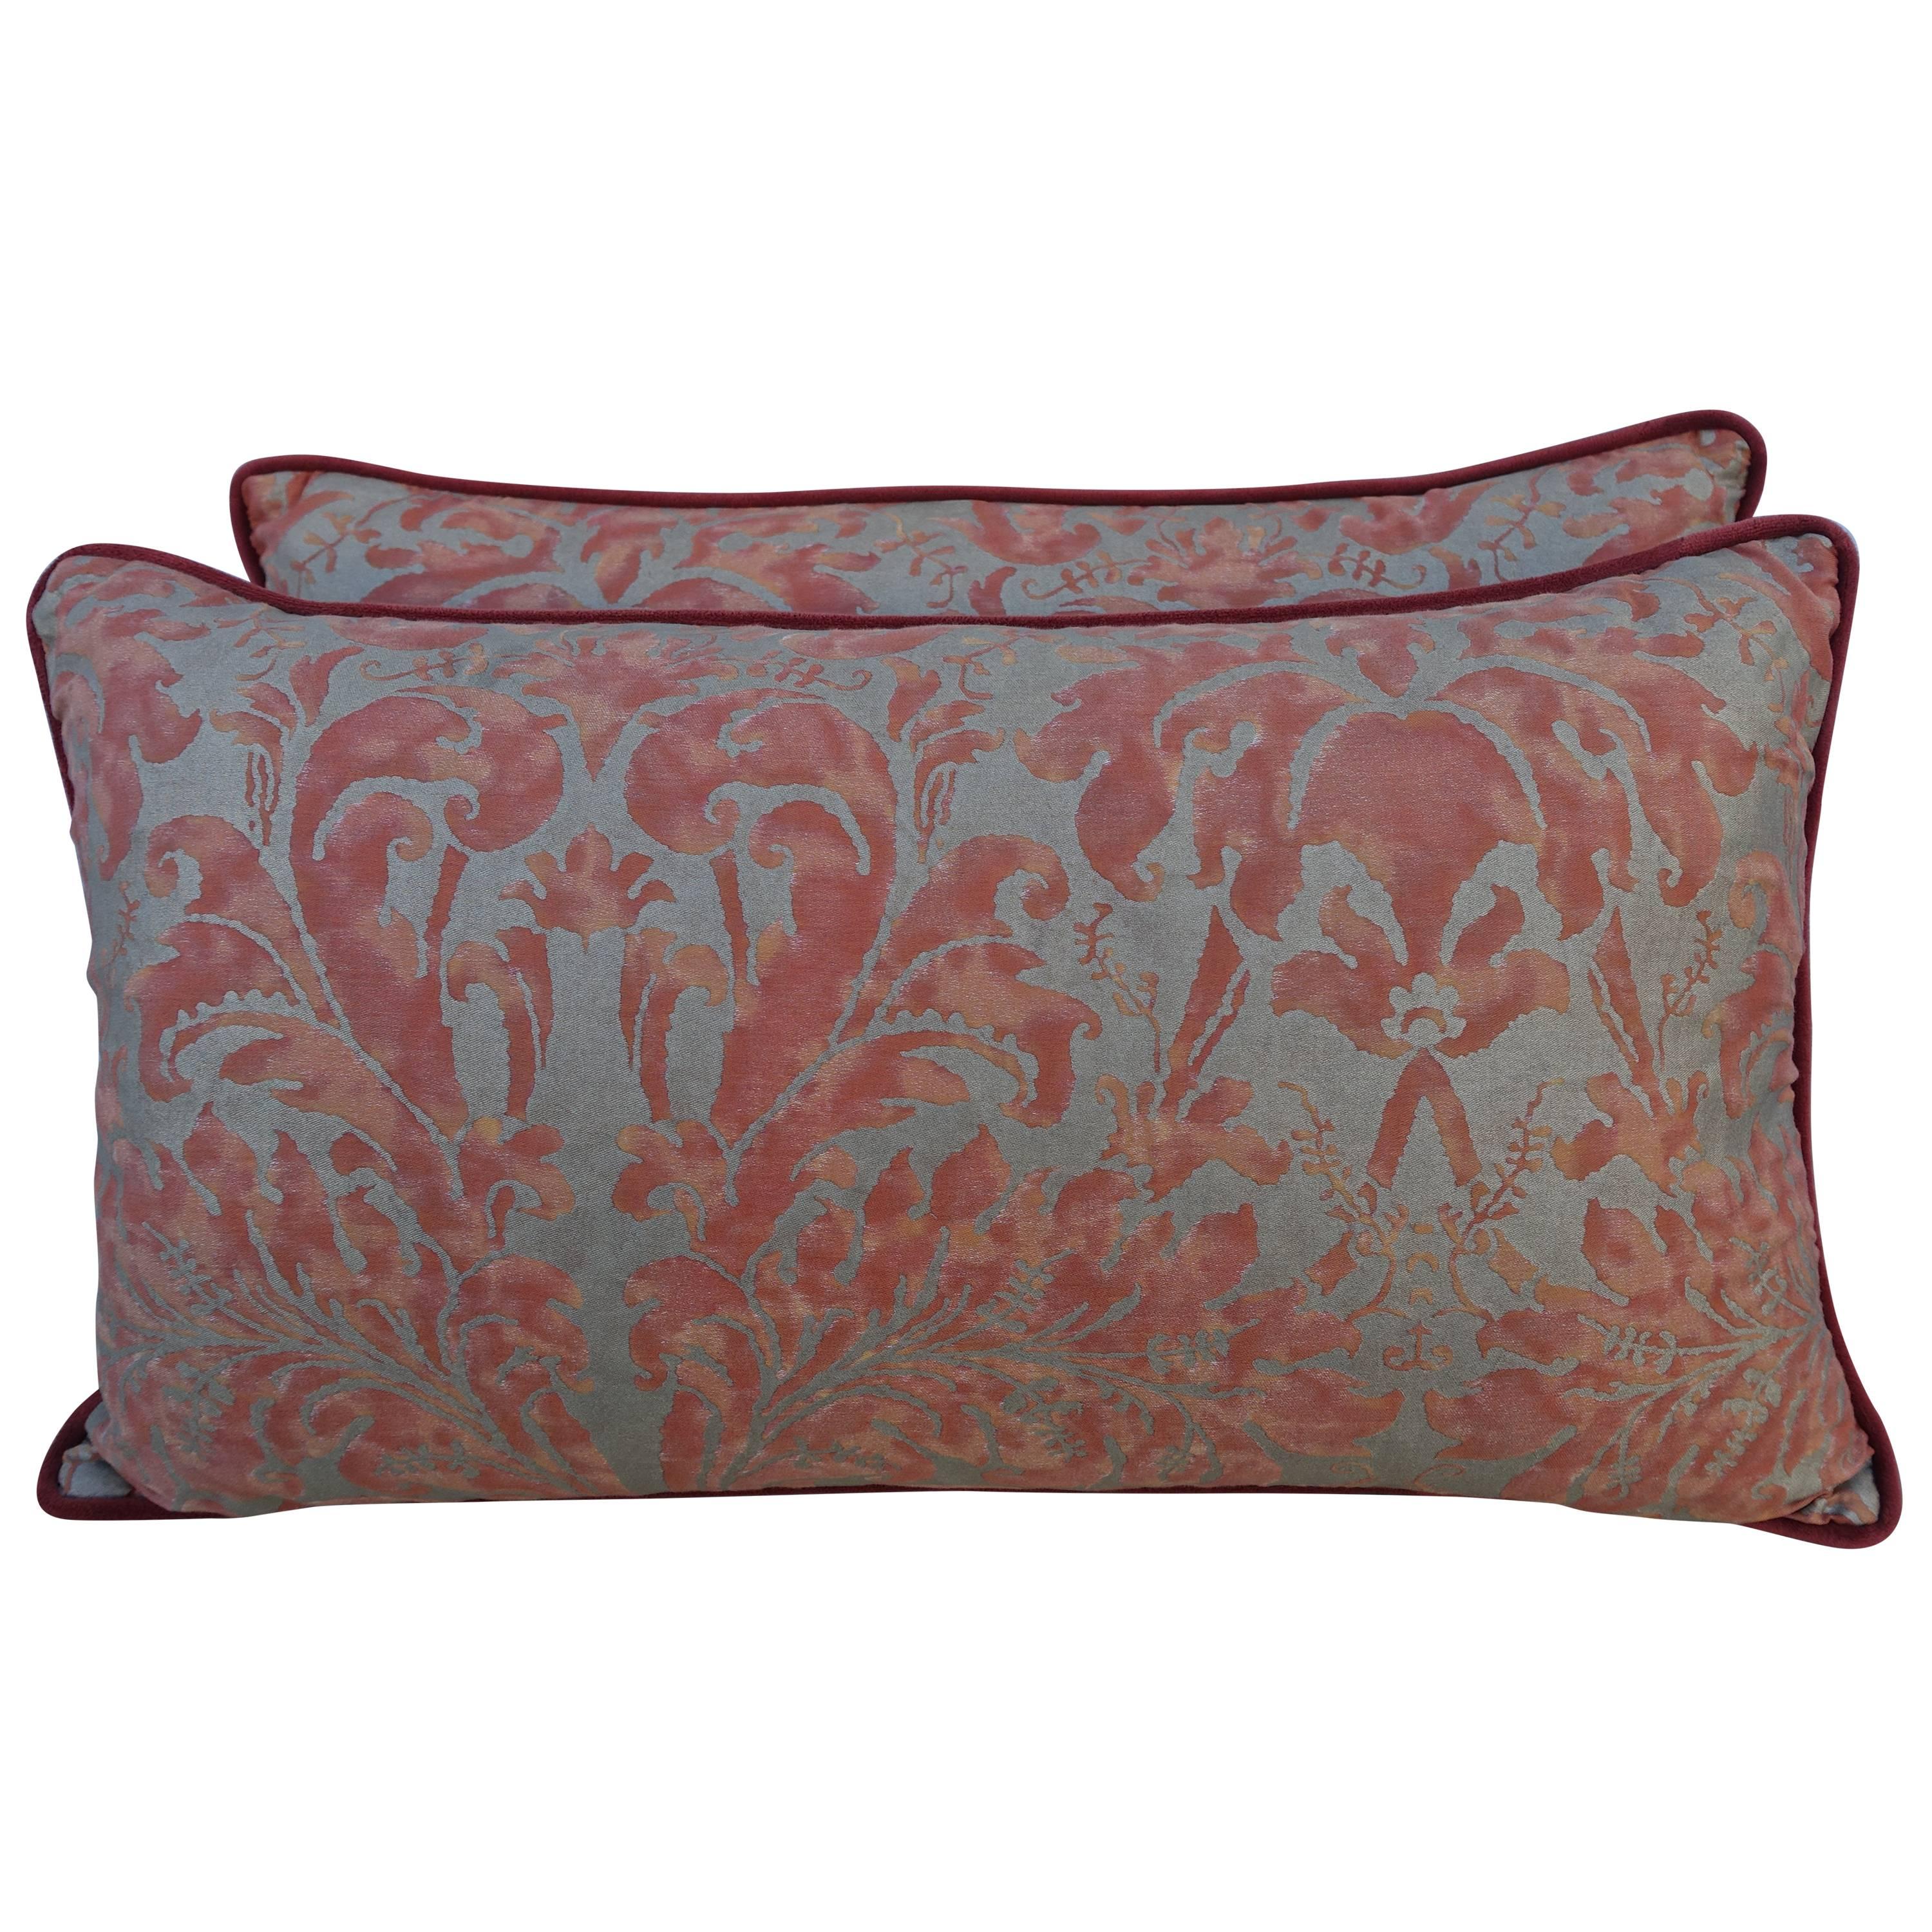 Pair of Lucrezia Patterned Fortuny Pillows